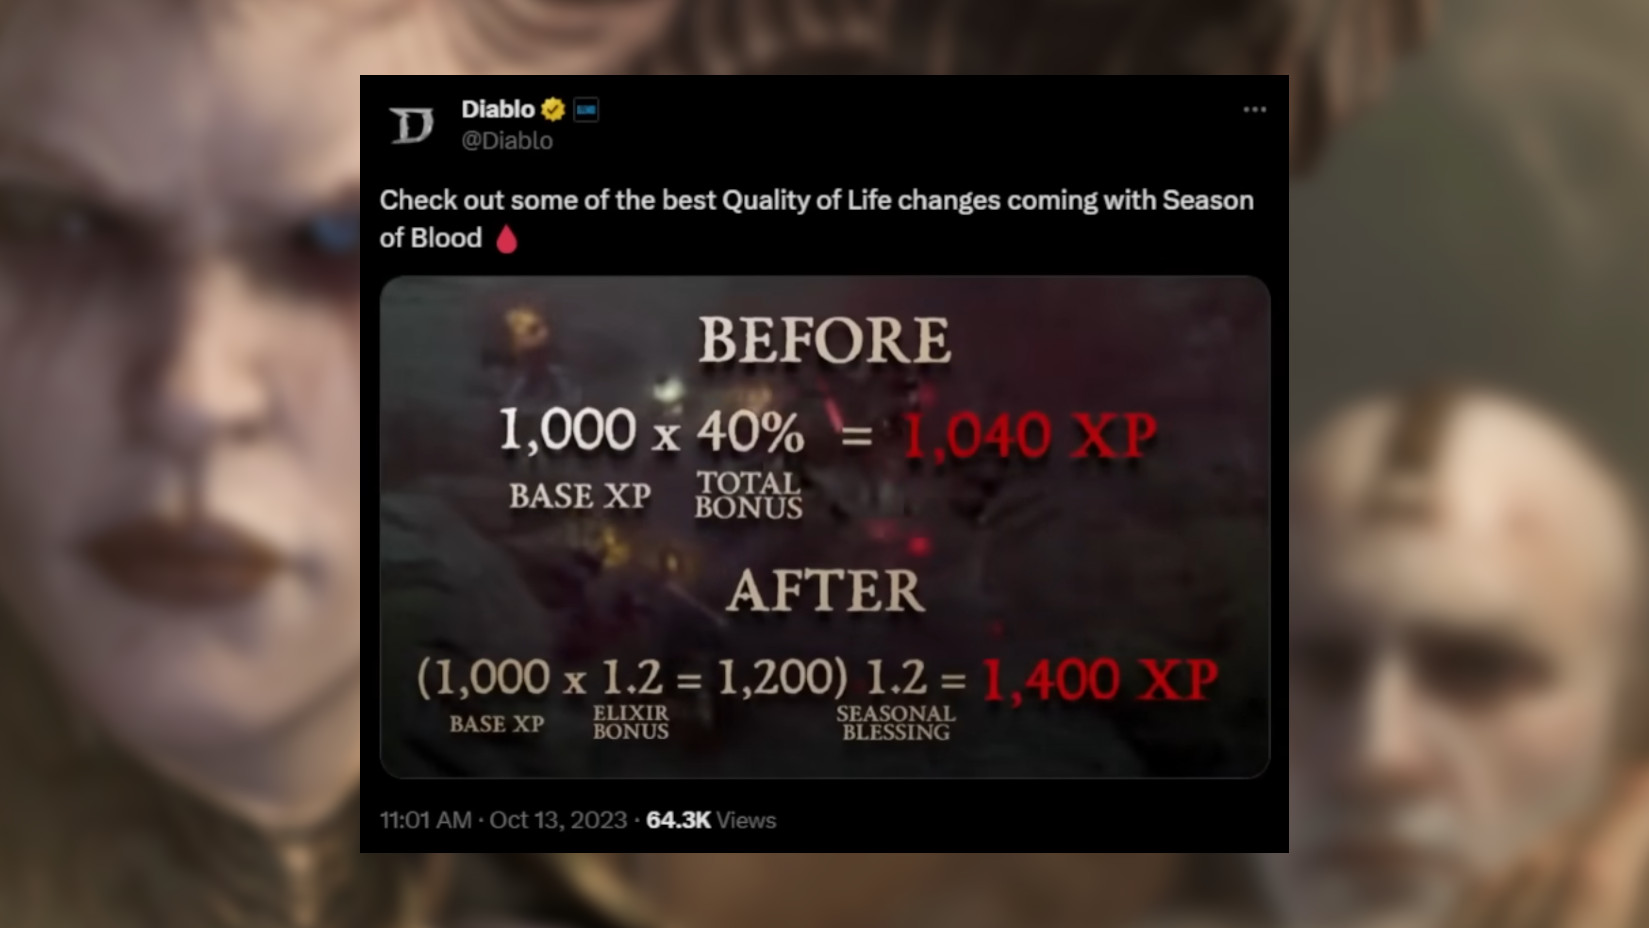 The biggest quality of life changes coming to Diablo 4 with the